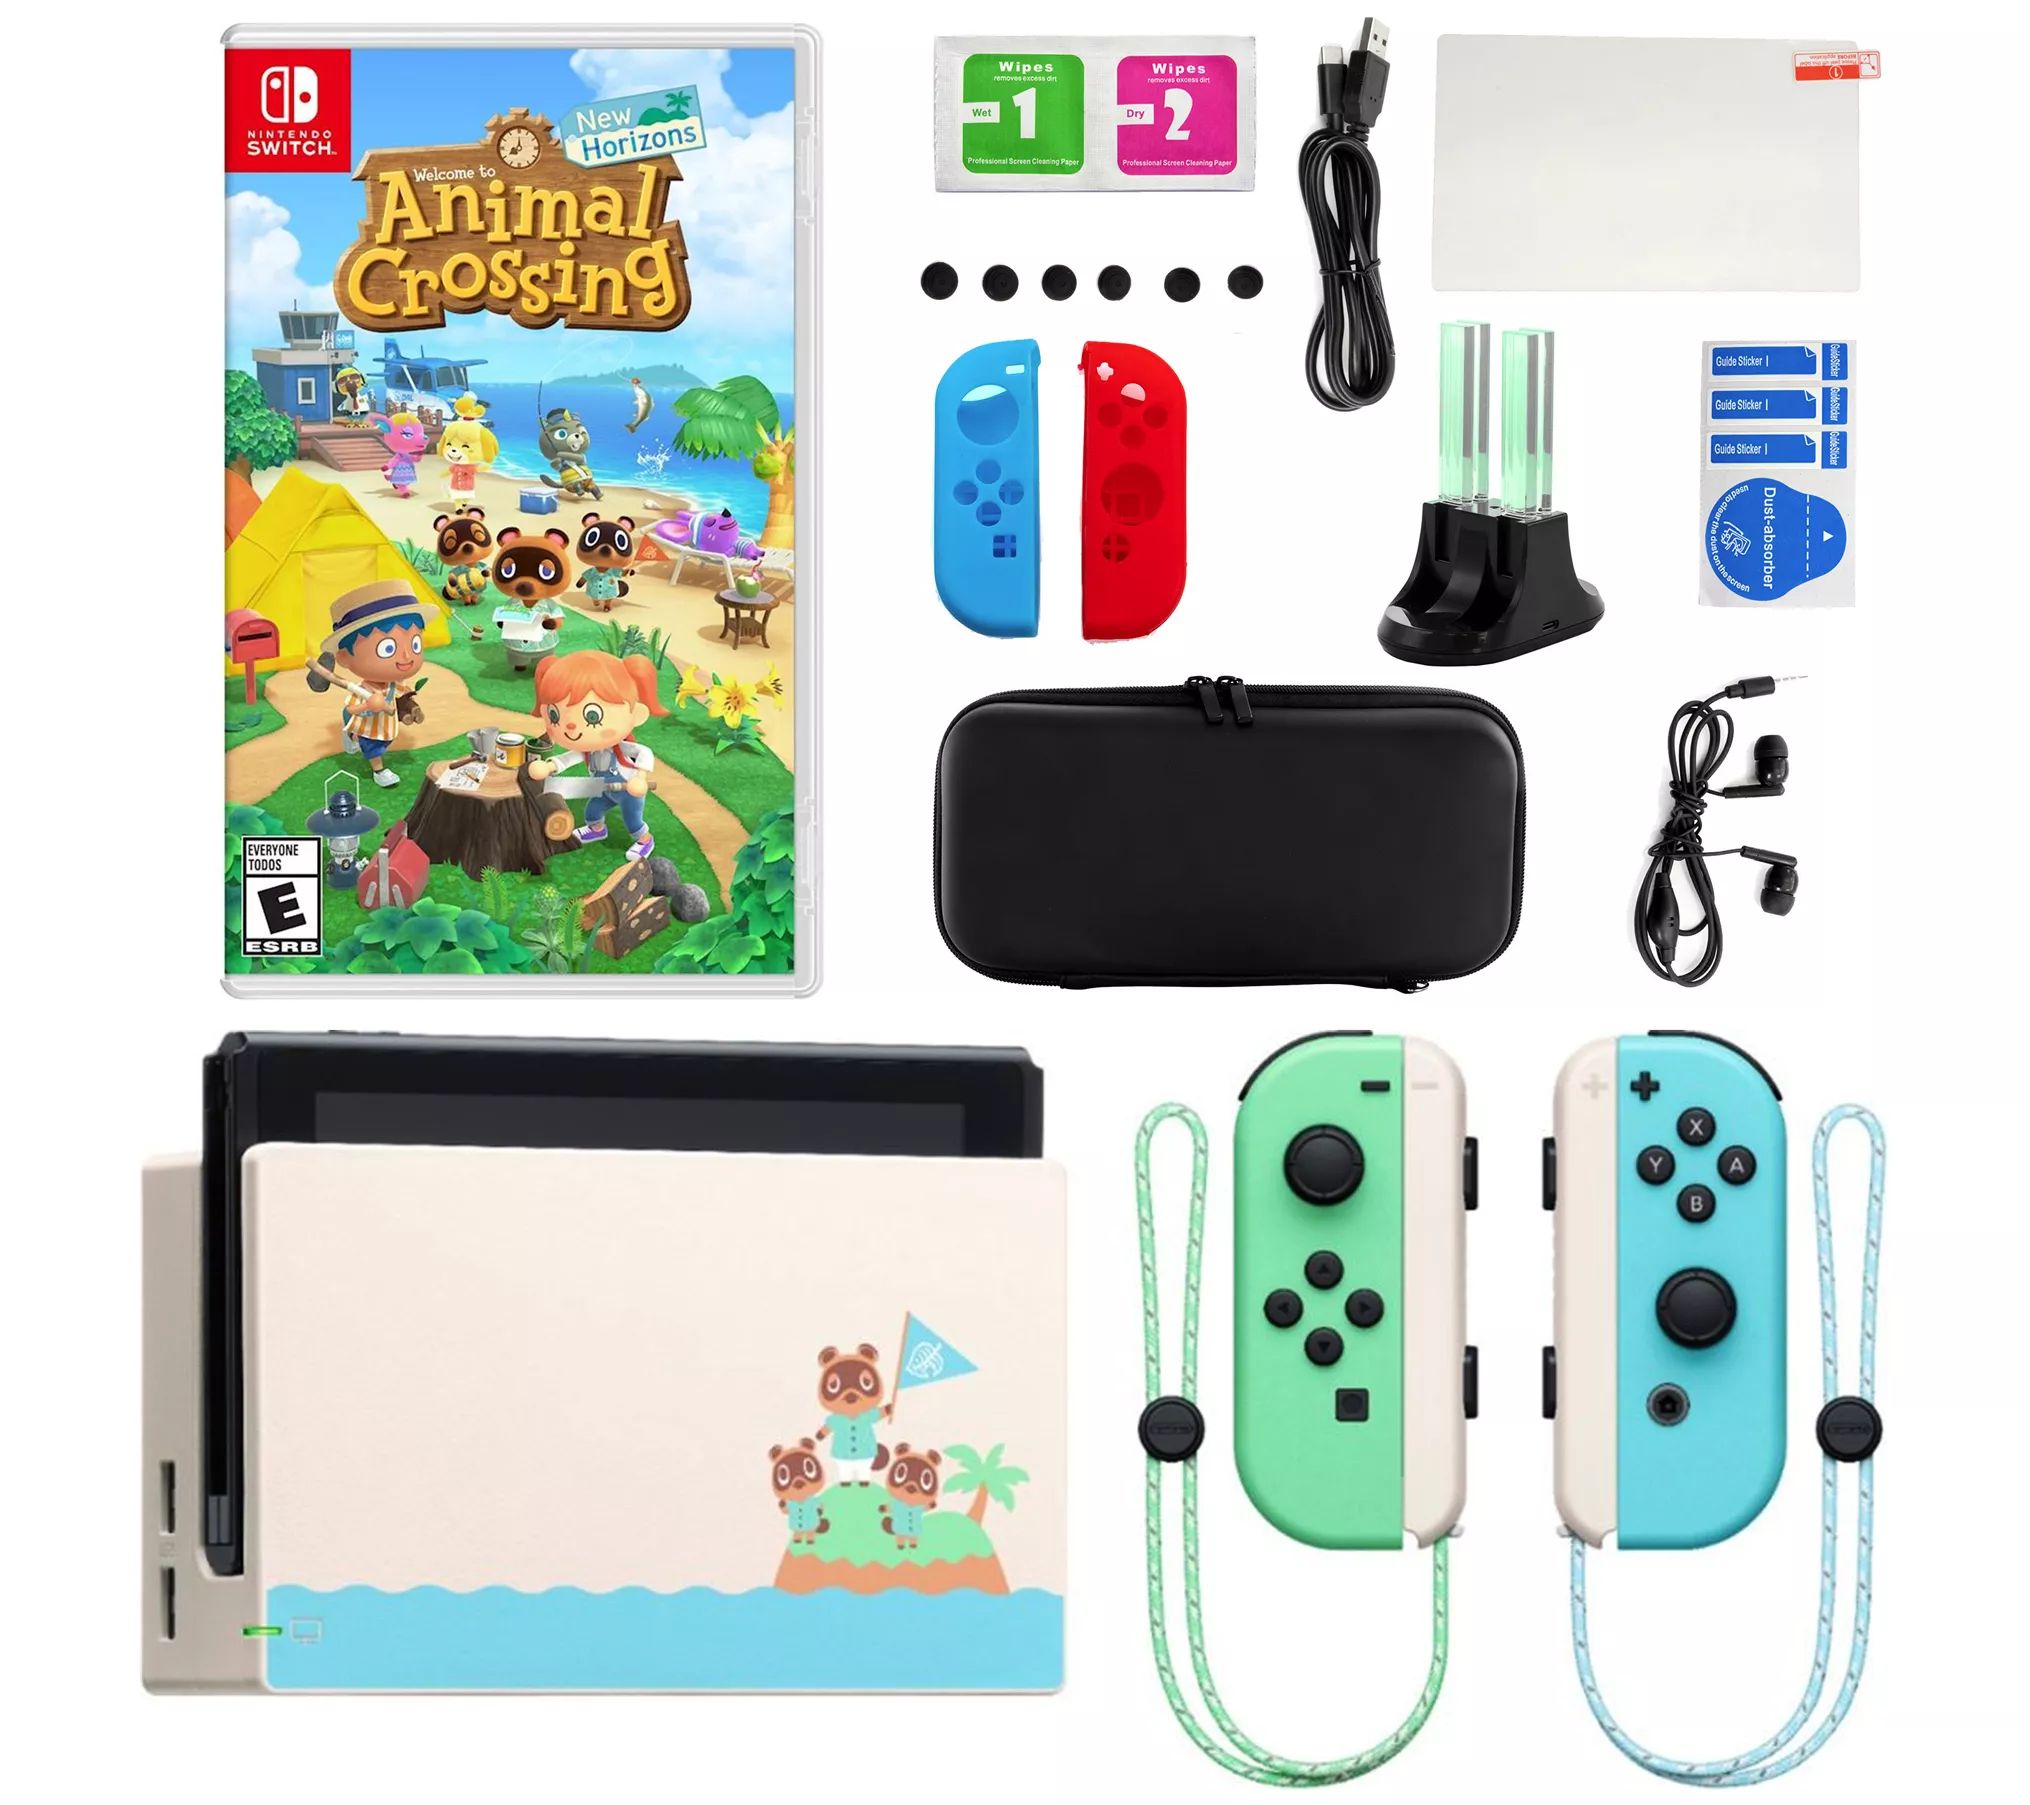 Nintendo Switch Special Edition Console with Animal Crossing & Accessories - QVC.com | QVC